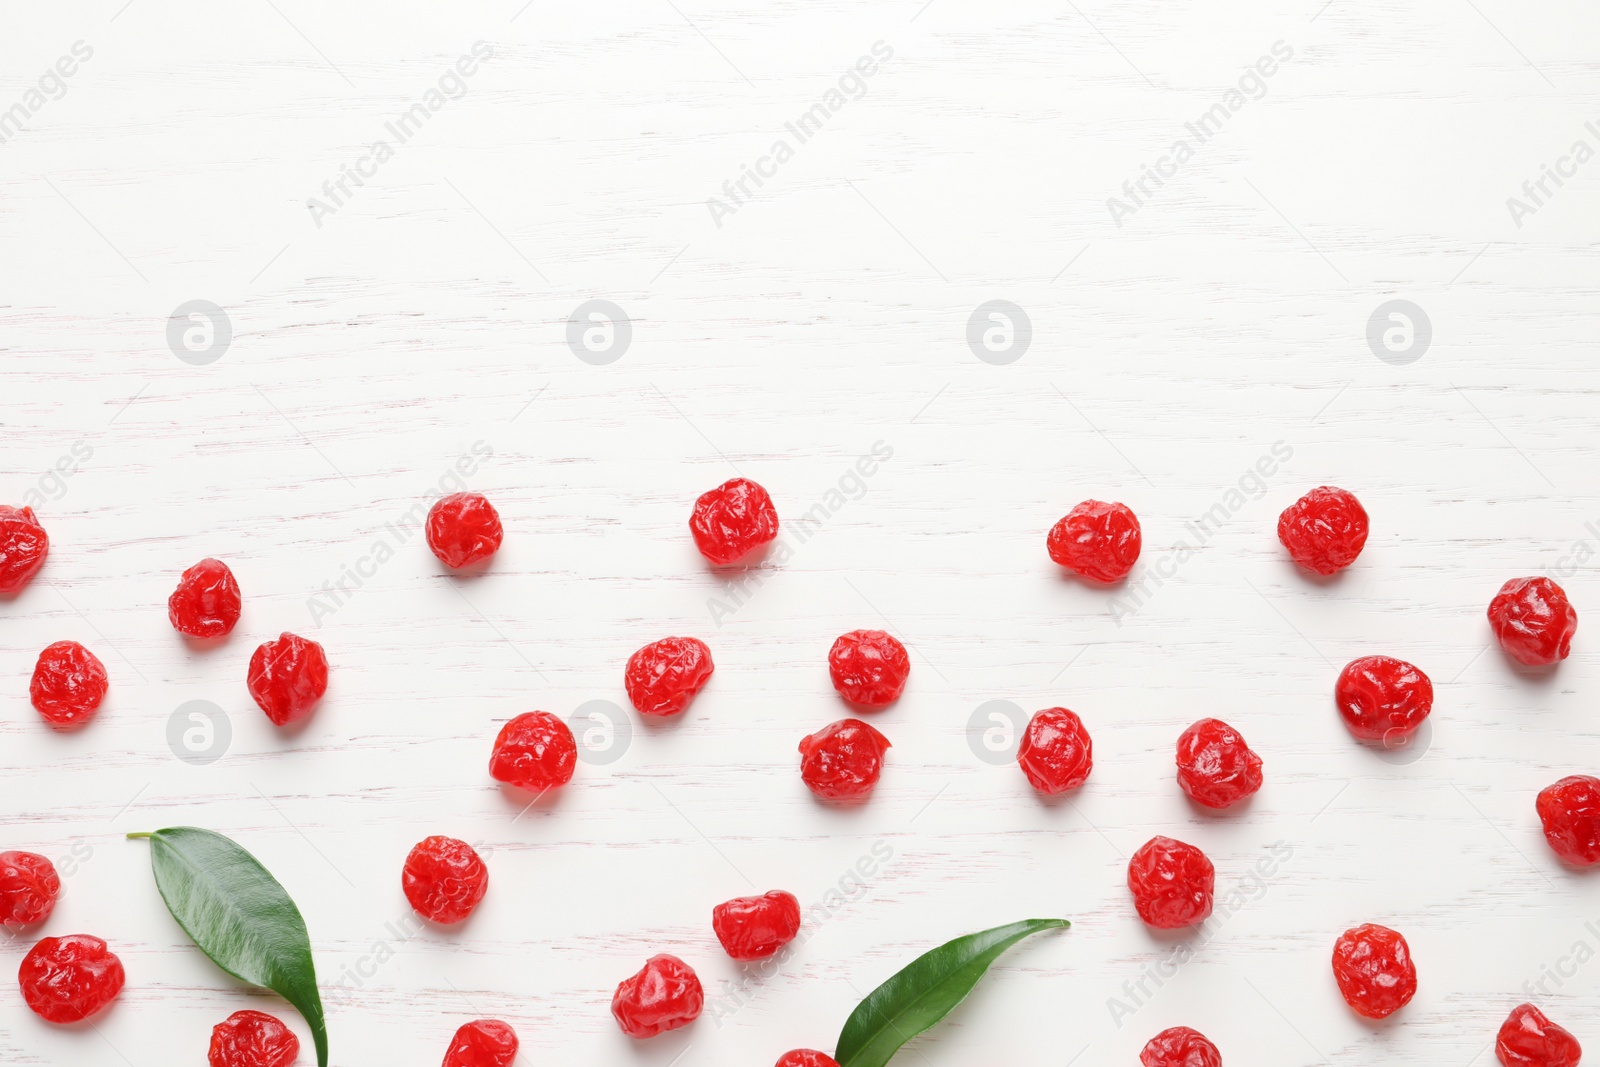 Photo of Tasty cherries on wooden background, flat lay with space for text. Dried fruits as healthy food